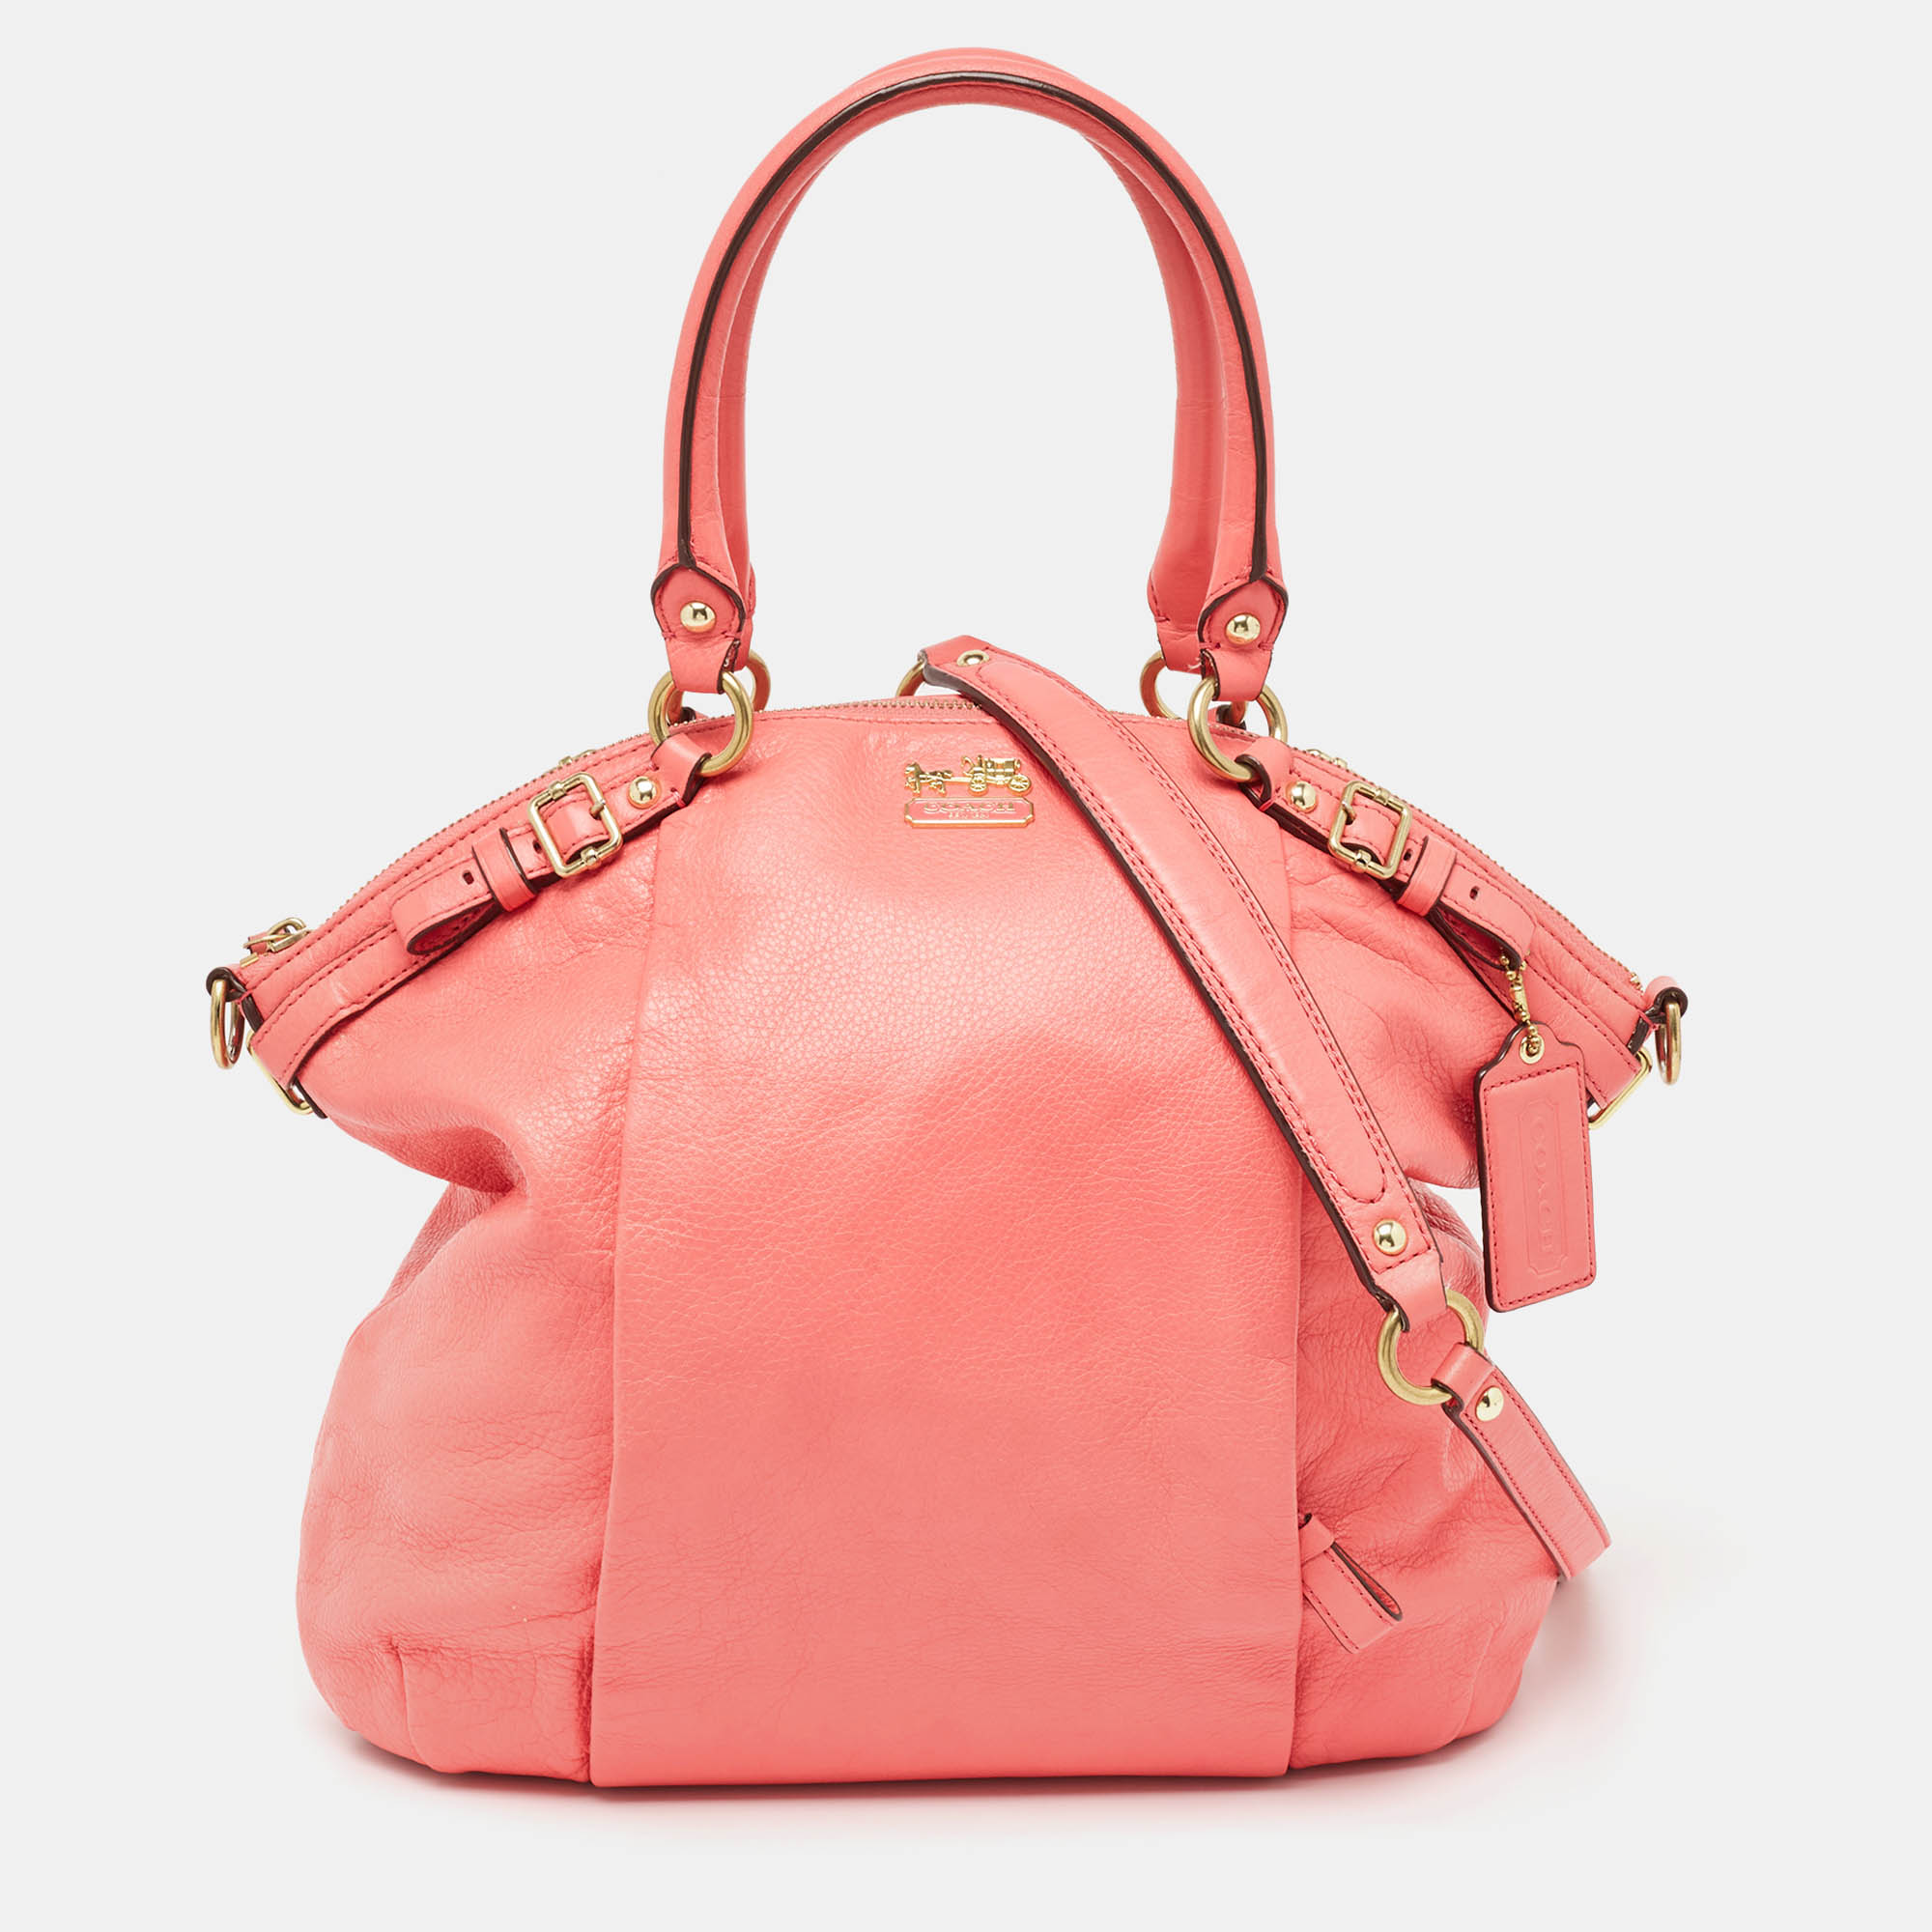 

Coach Hot Pink Leather Lindsey Tote